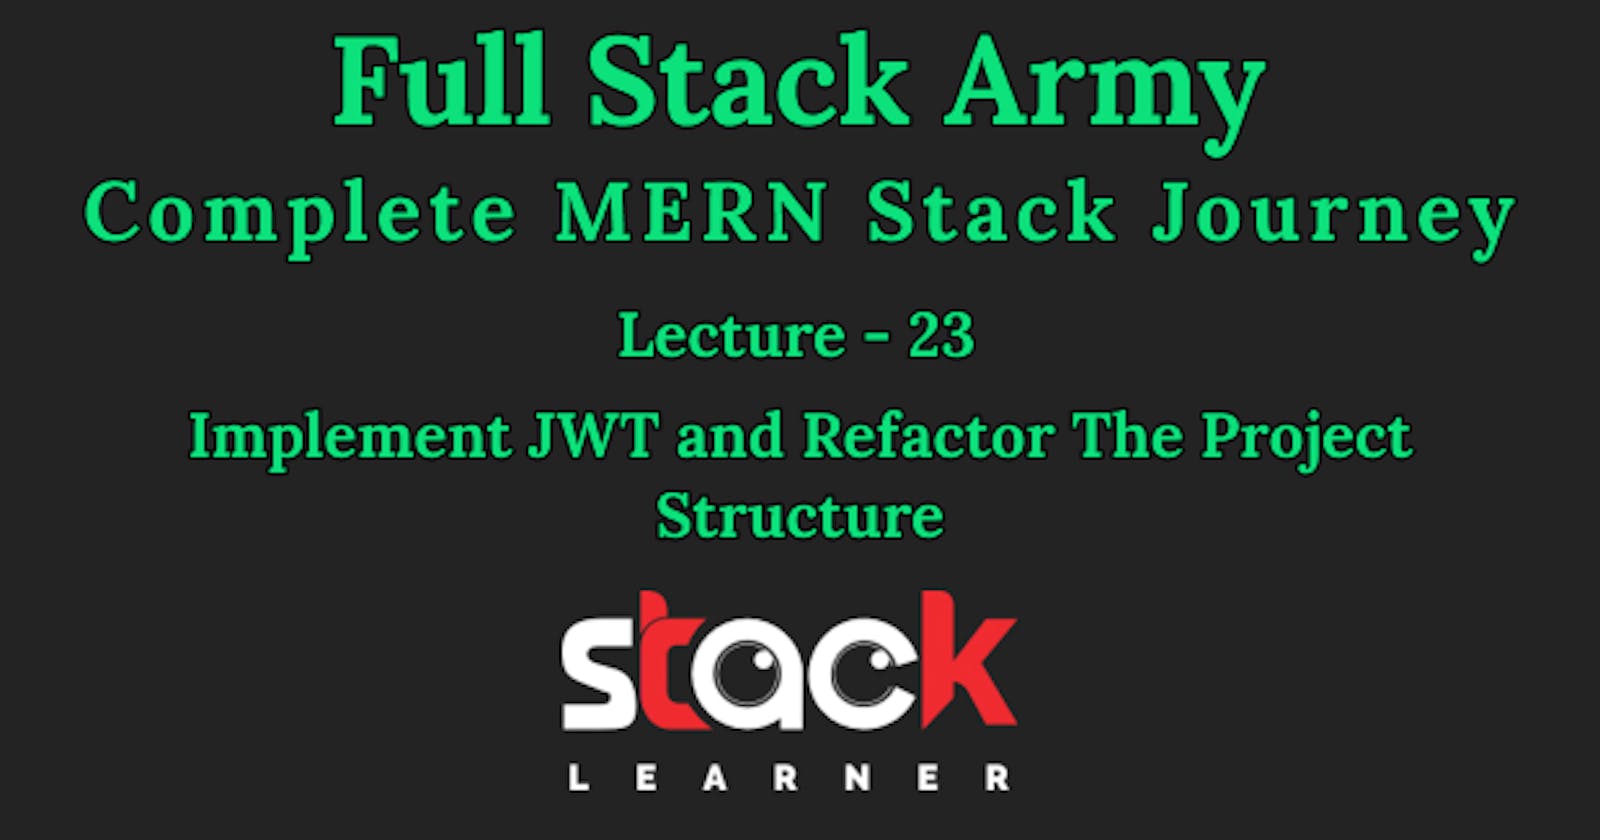 Lecture 23 - Implement JWT and Refactor The Project Structure